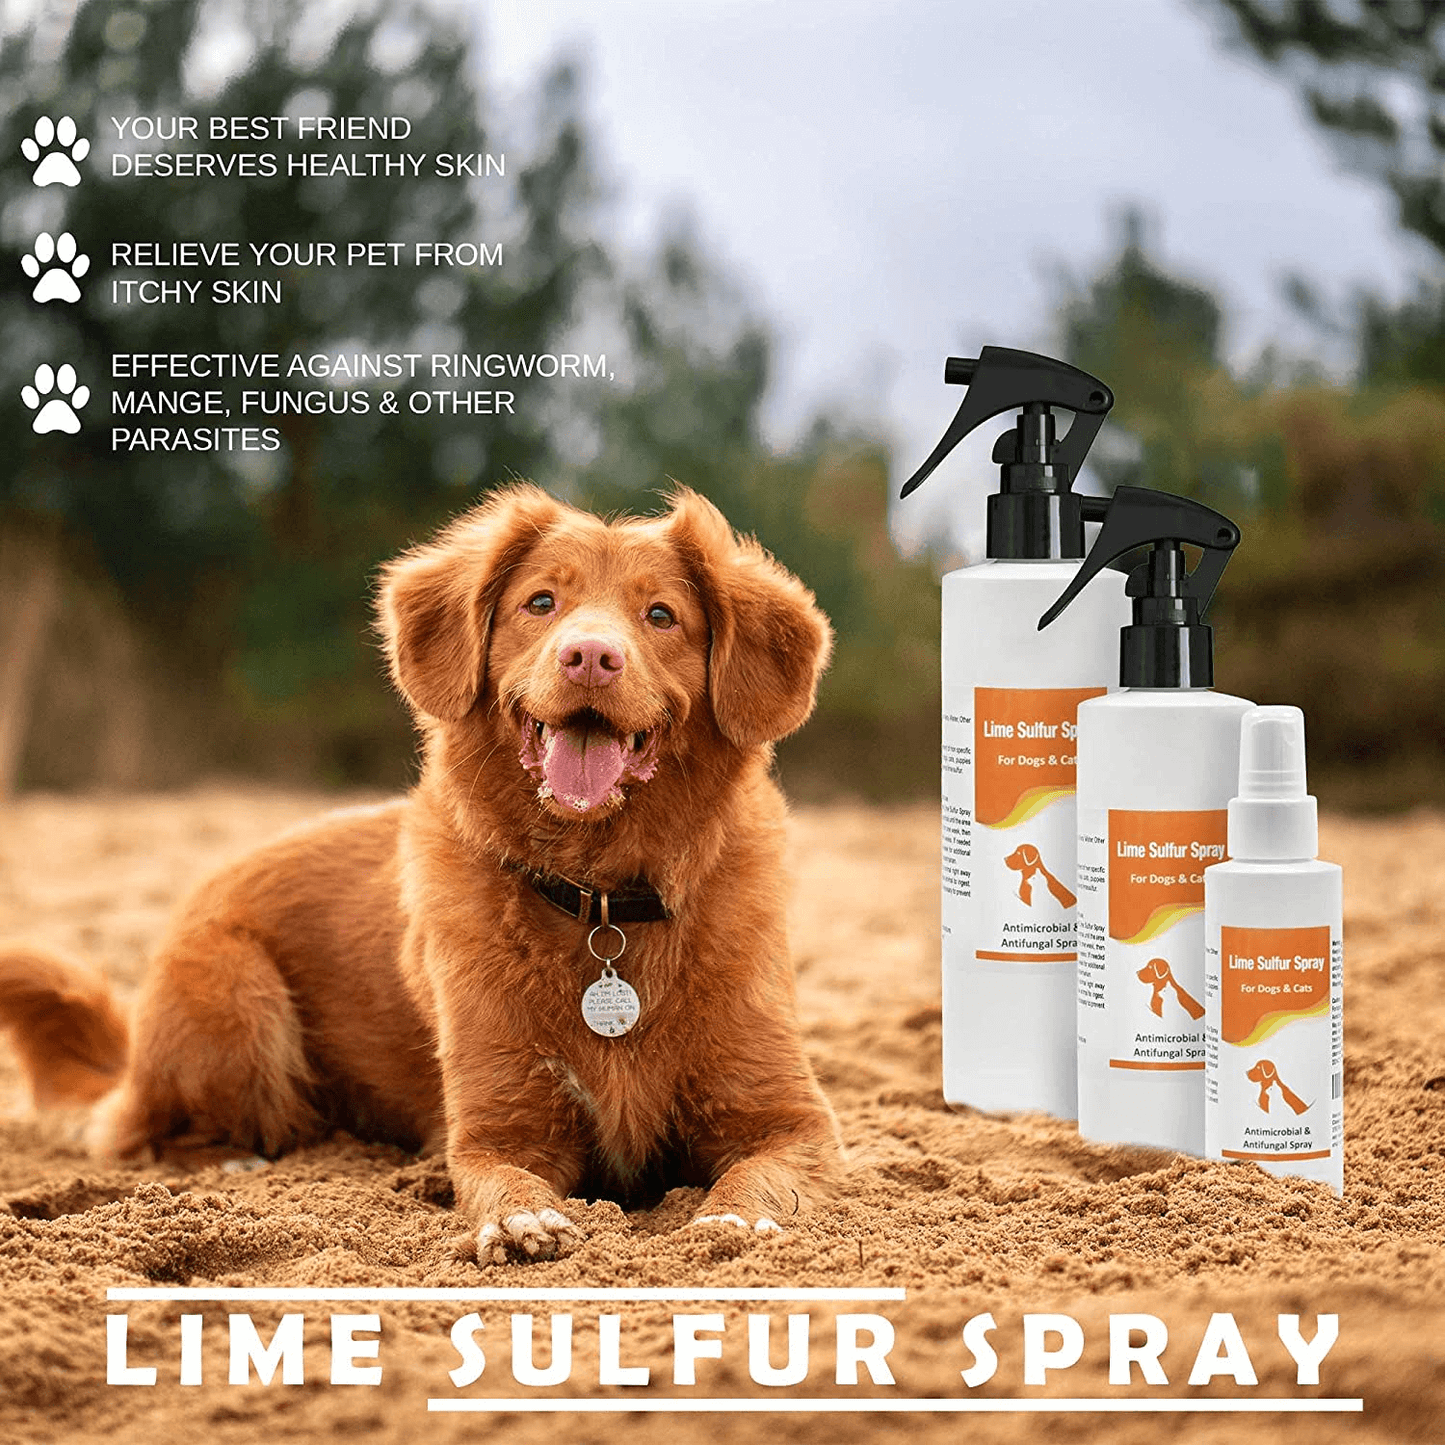 Bundle of Classic's Lime Sulfur Pet Skin Cream and Spray